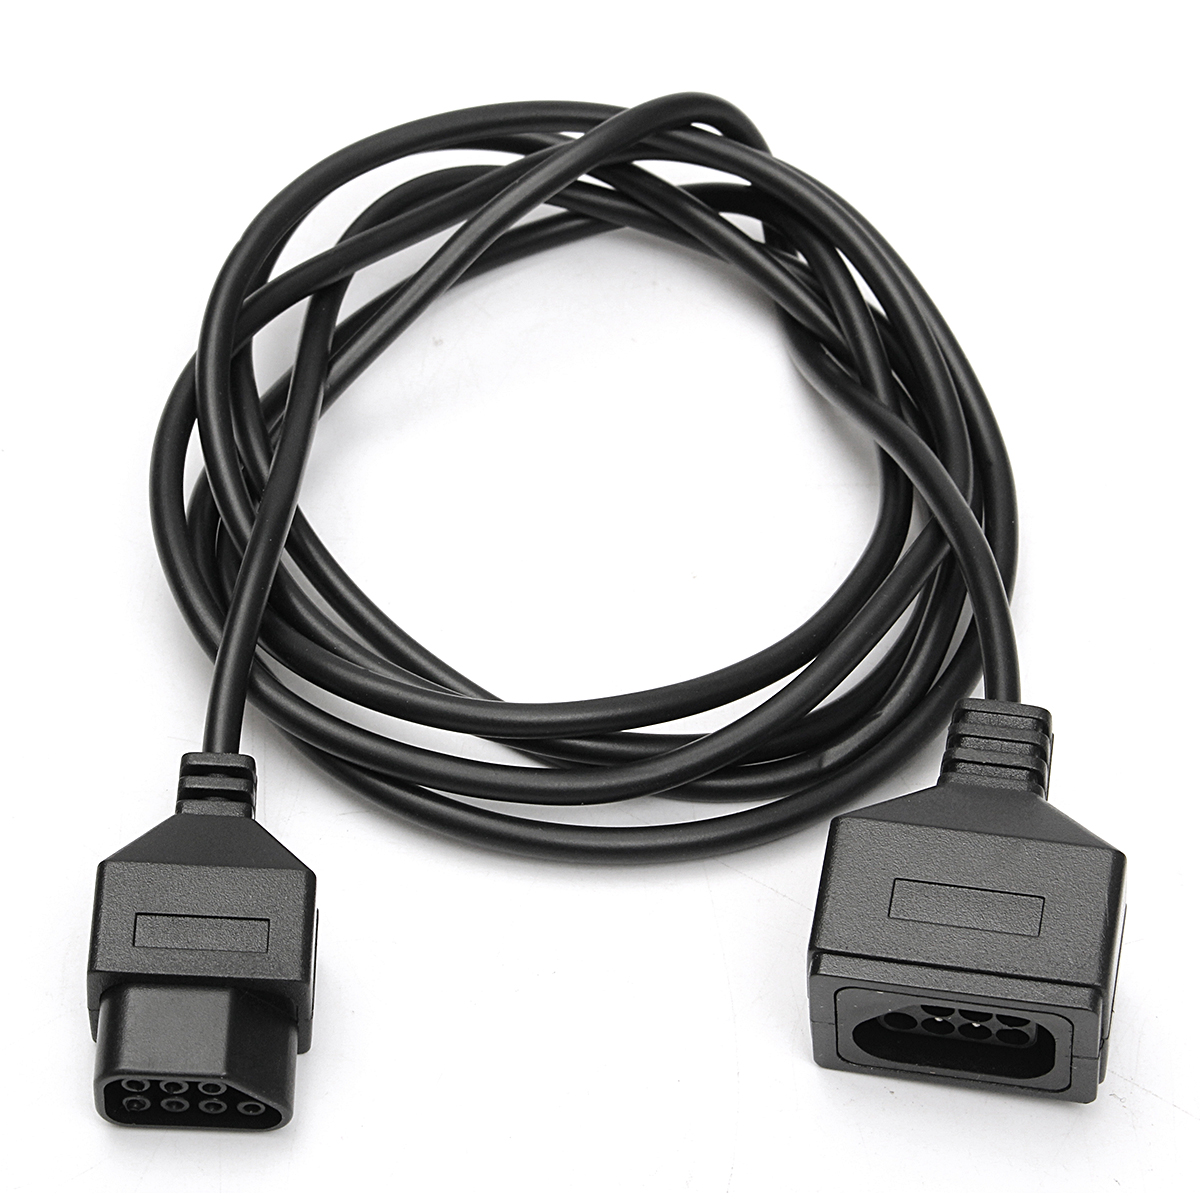 6inch Extension Cable Cord for Nintendo NES Game Controller Gamepad Mini Classic Bit 6